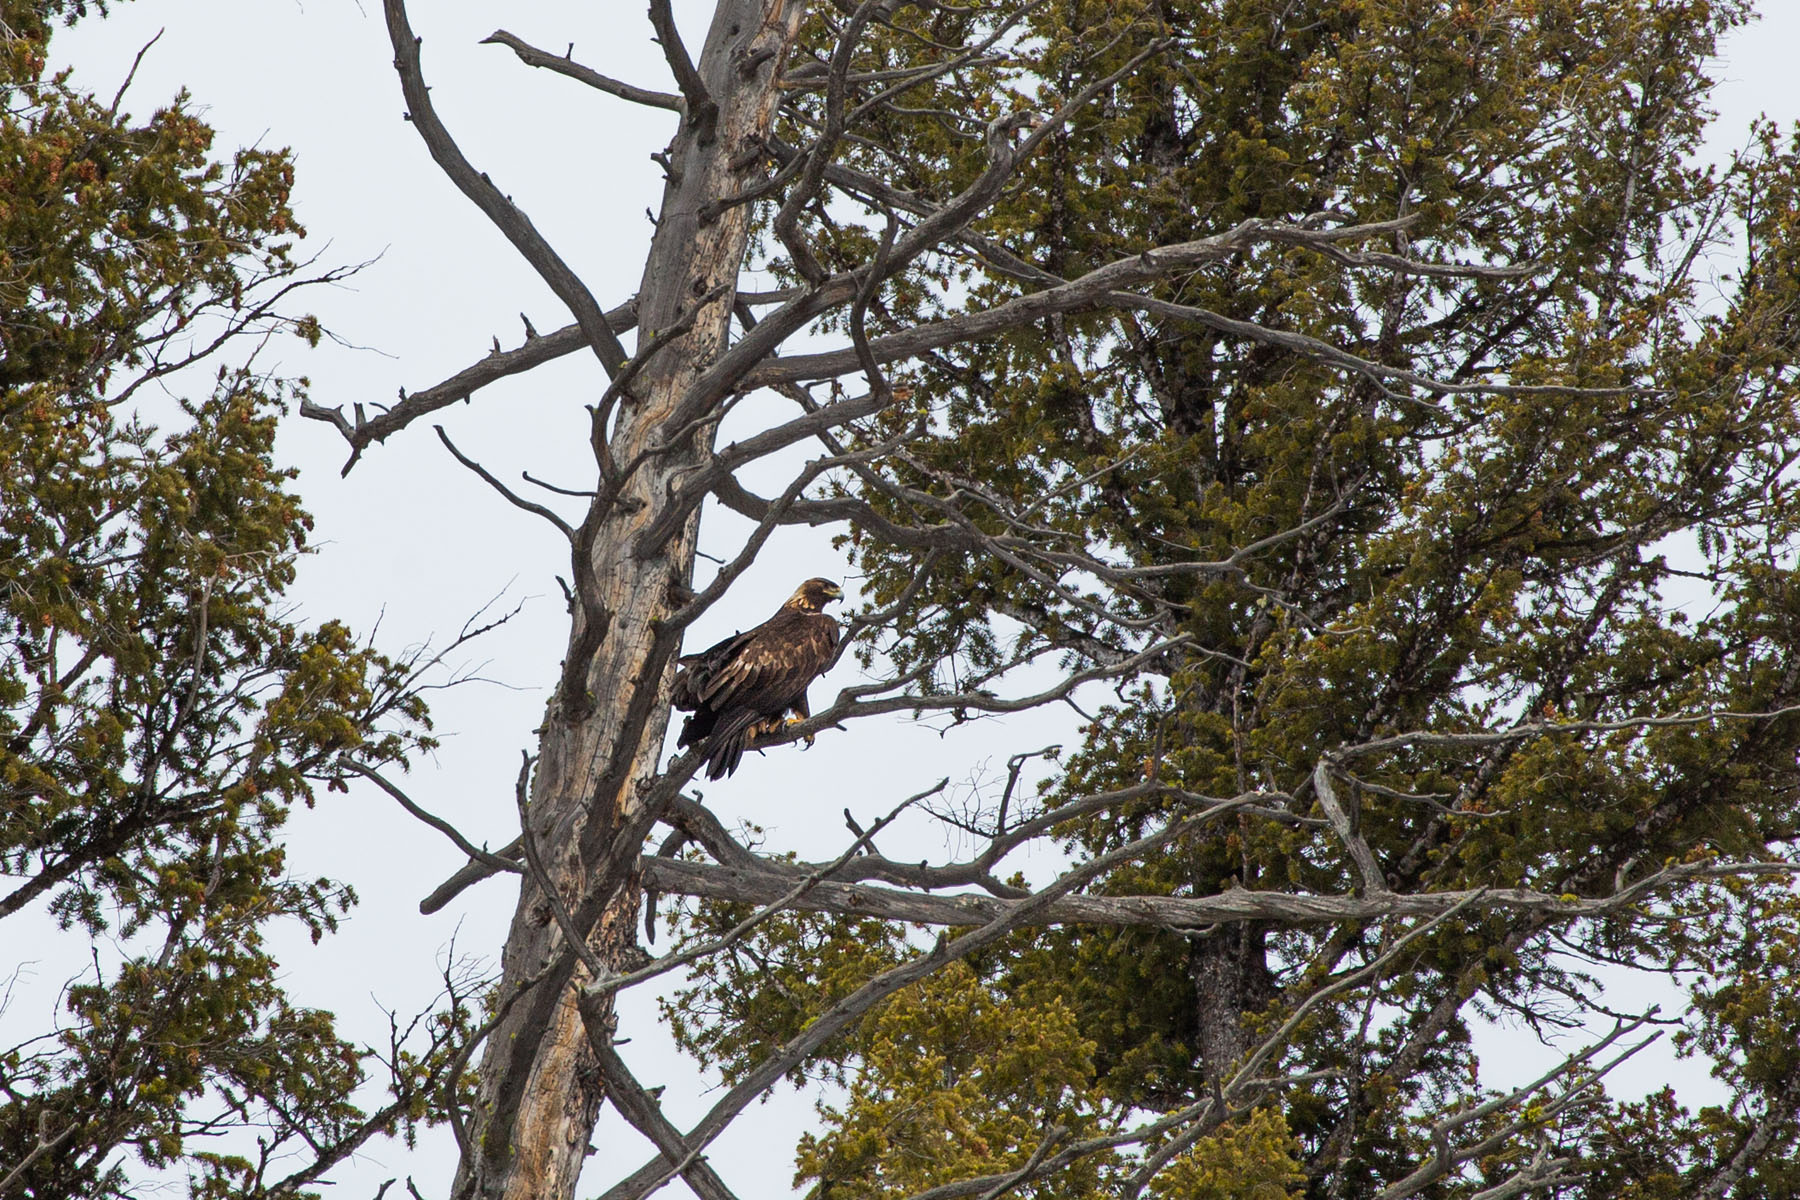 Golden eagle, Yellowstone, February 2022.  Click for next photo.